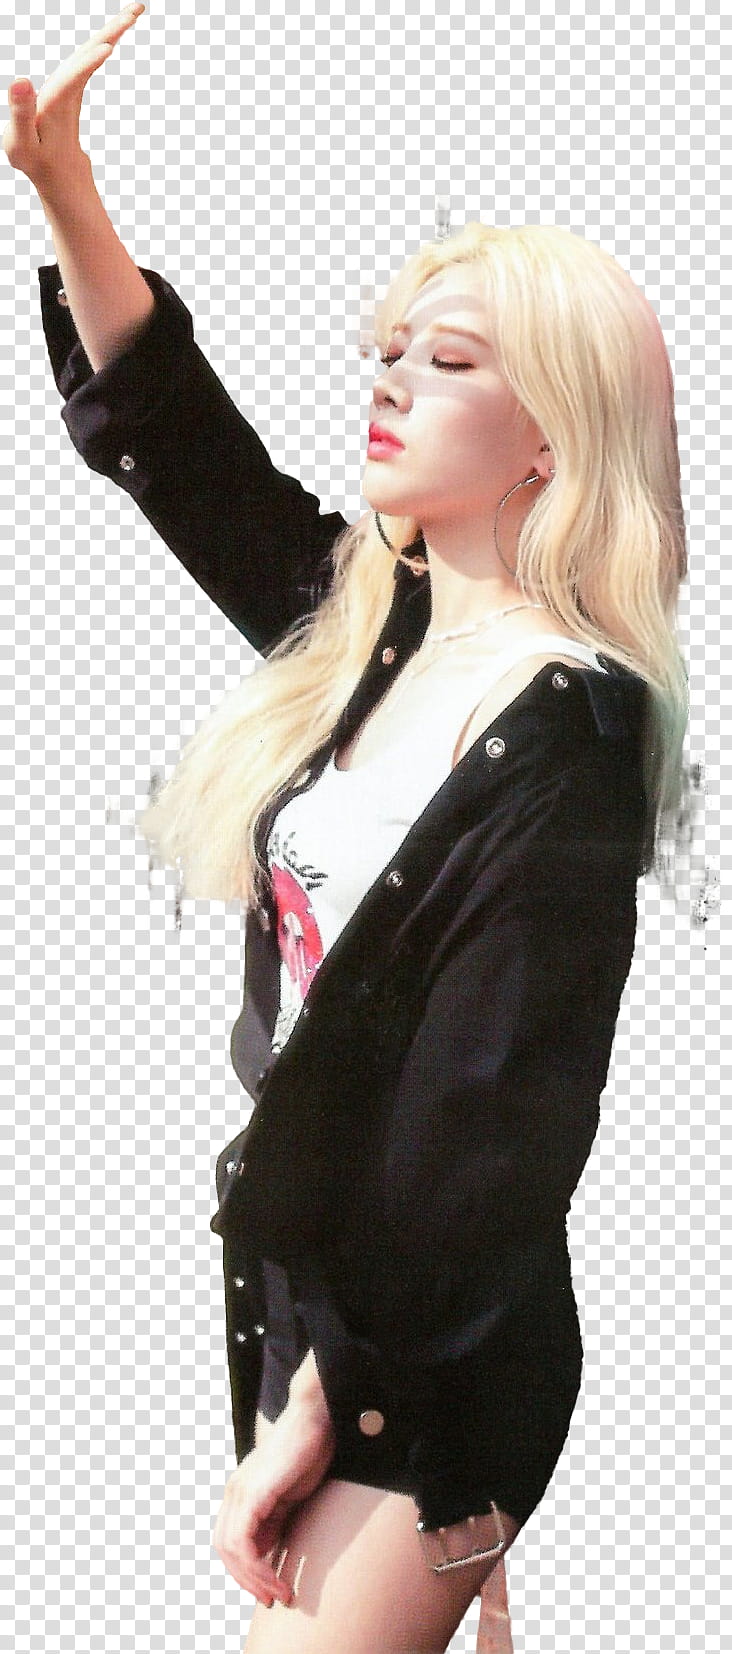 ODD EYE CIRCLE LOONA, woman wearing black jacket transparent background PNG clipart